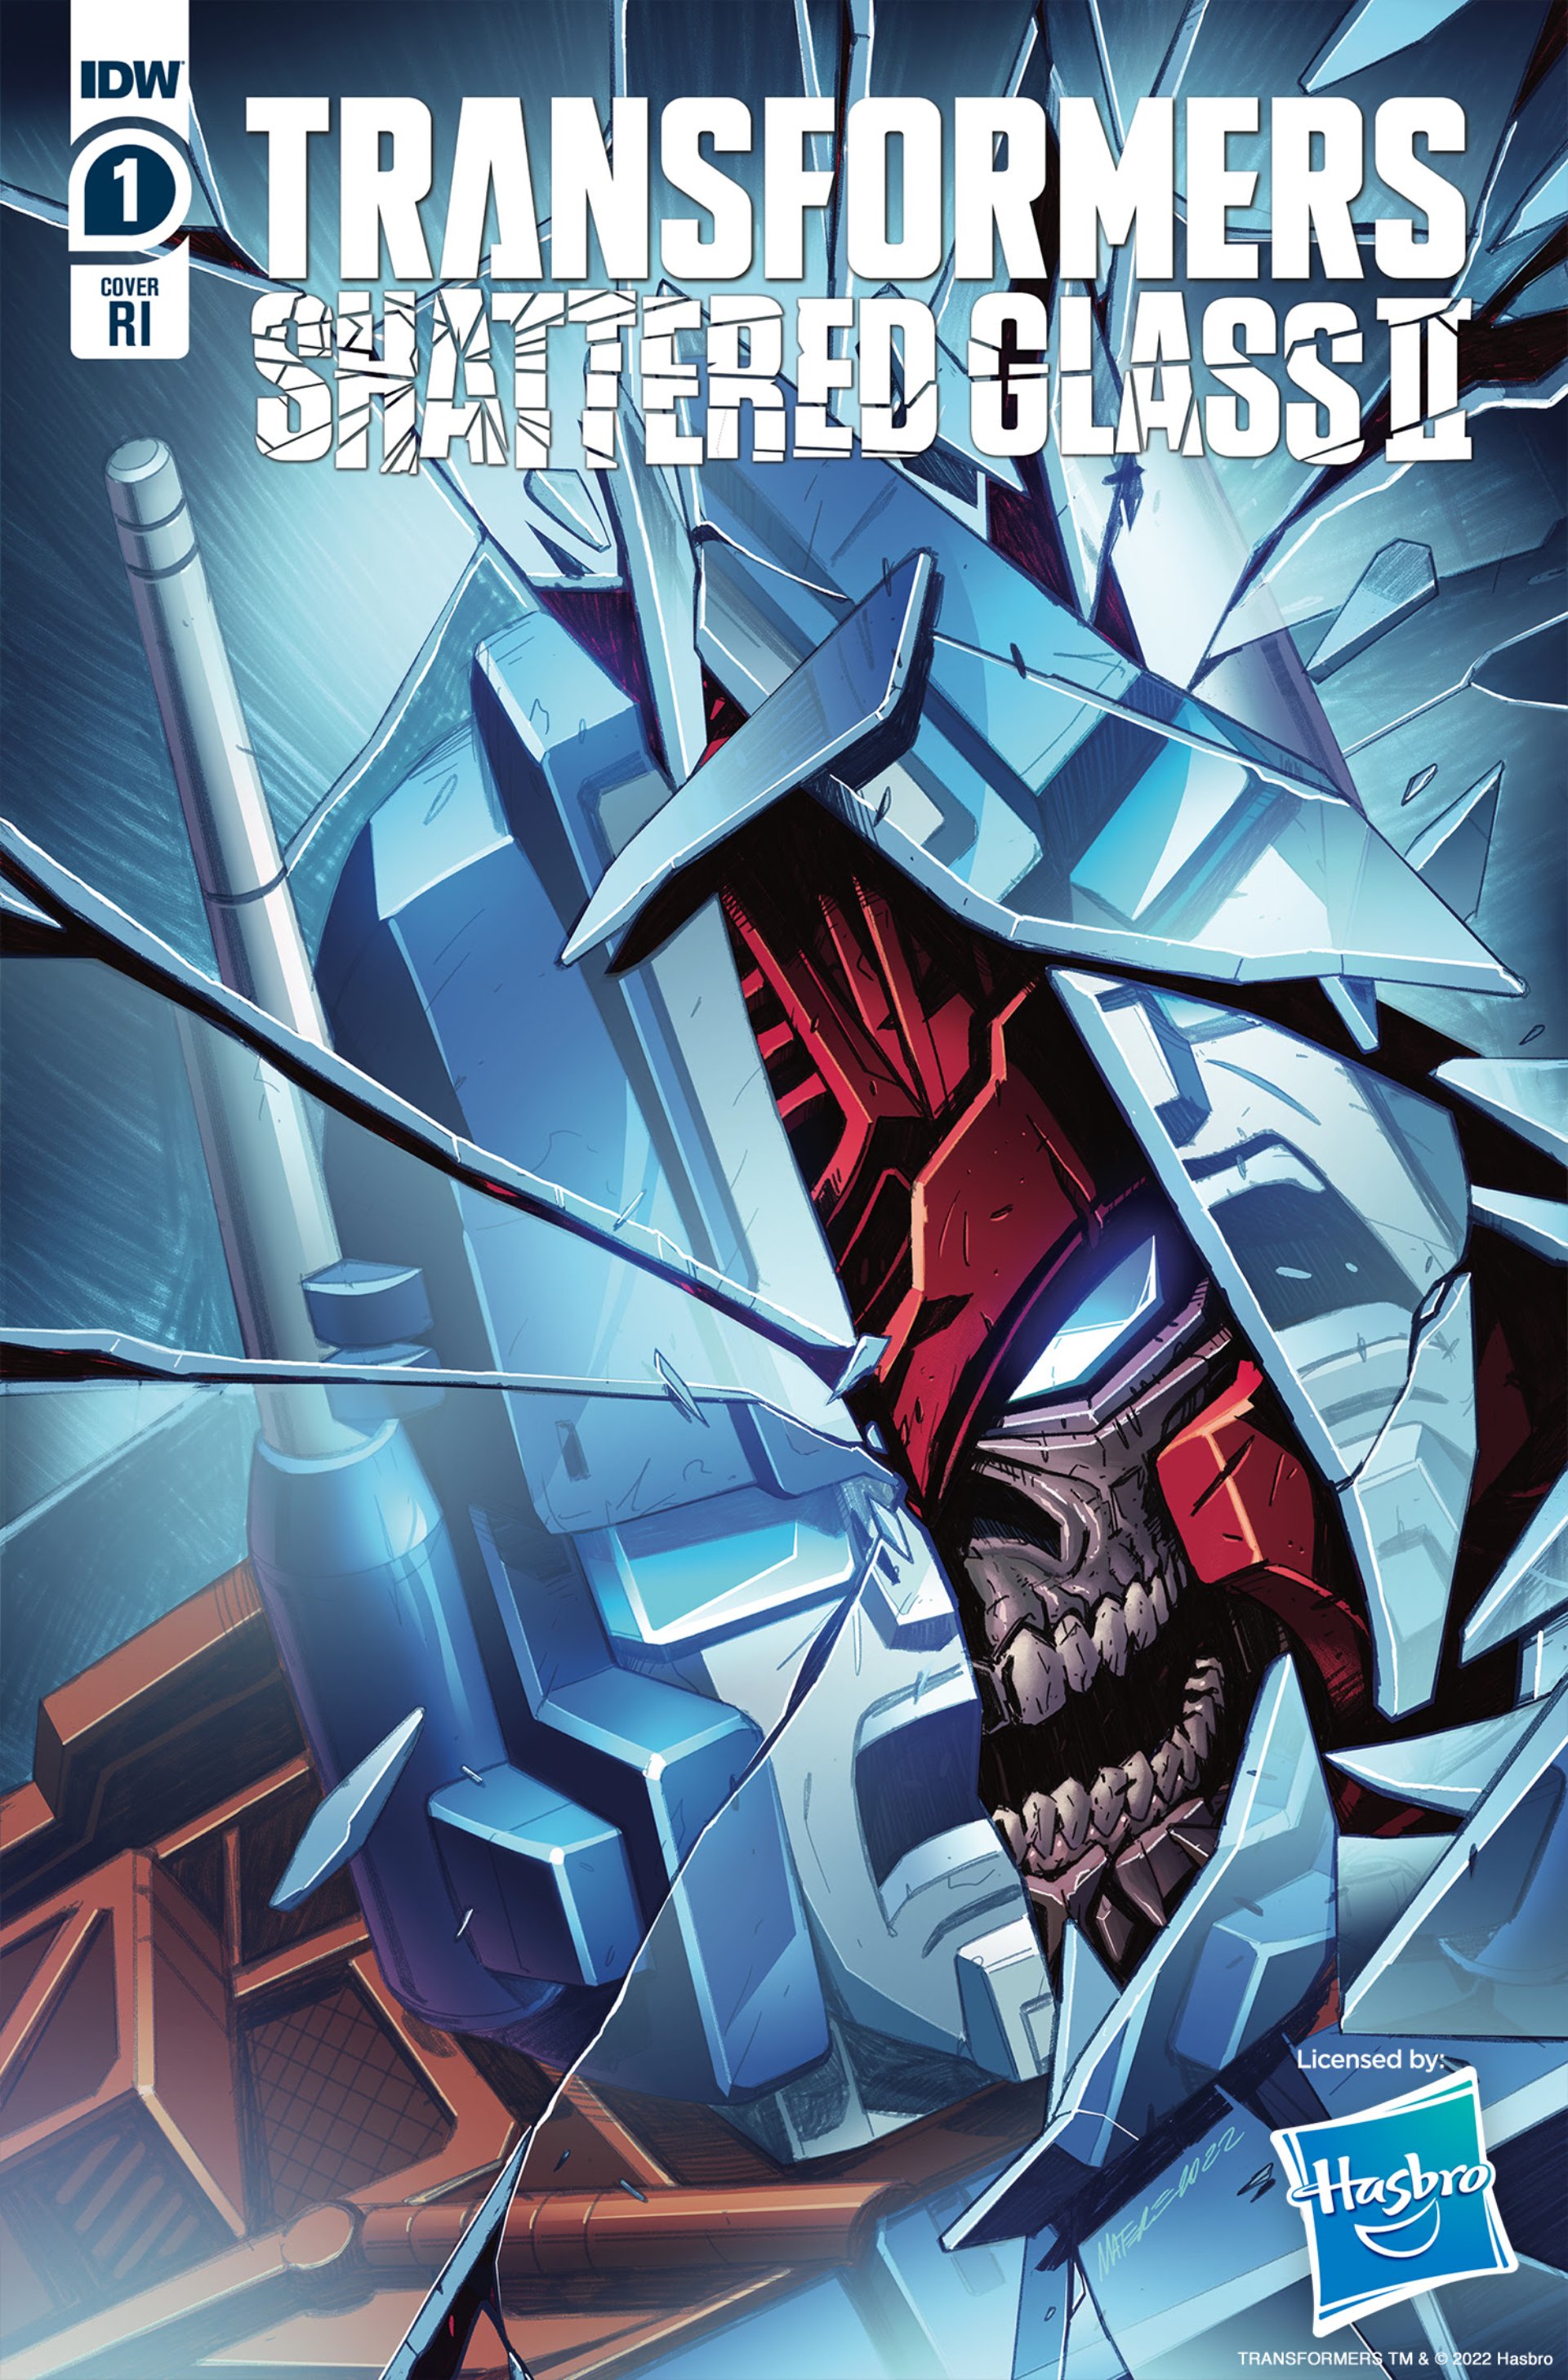 Transformers: Shattered Glass 2 #1 variant cover by Nick Brokenshire